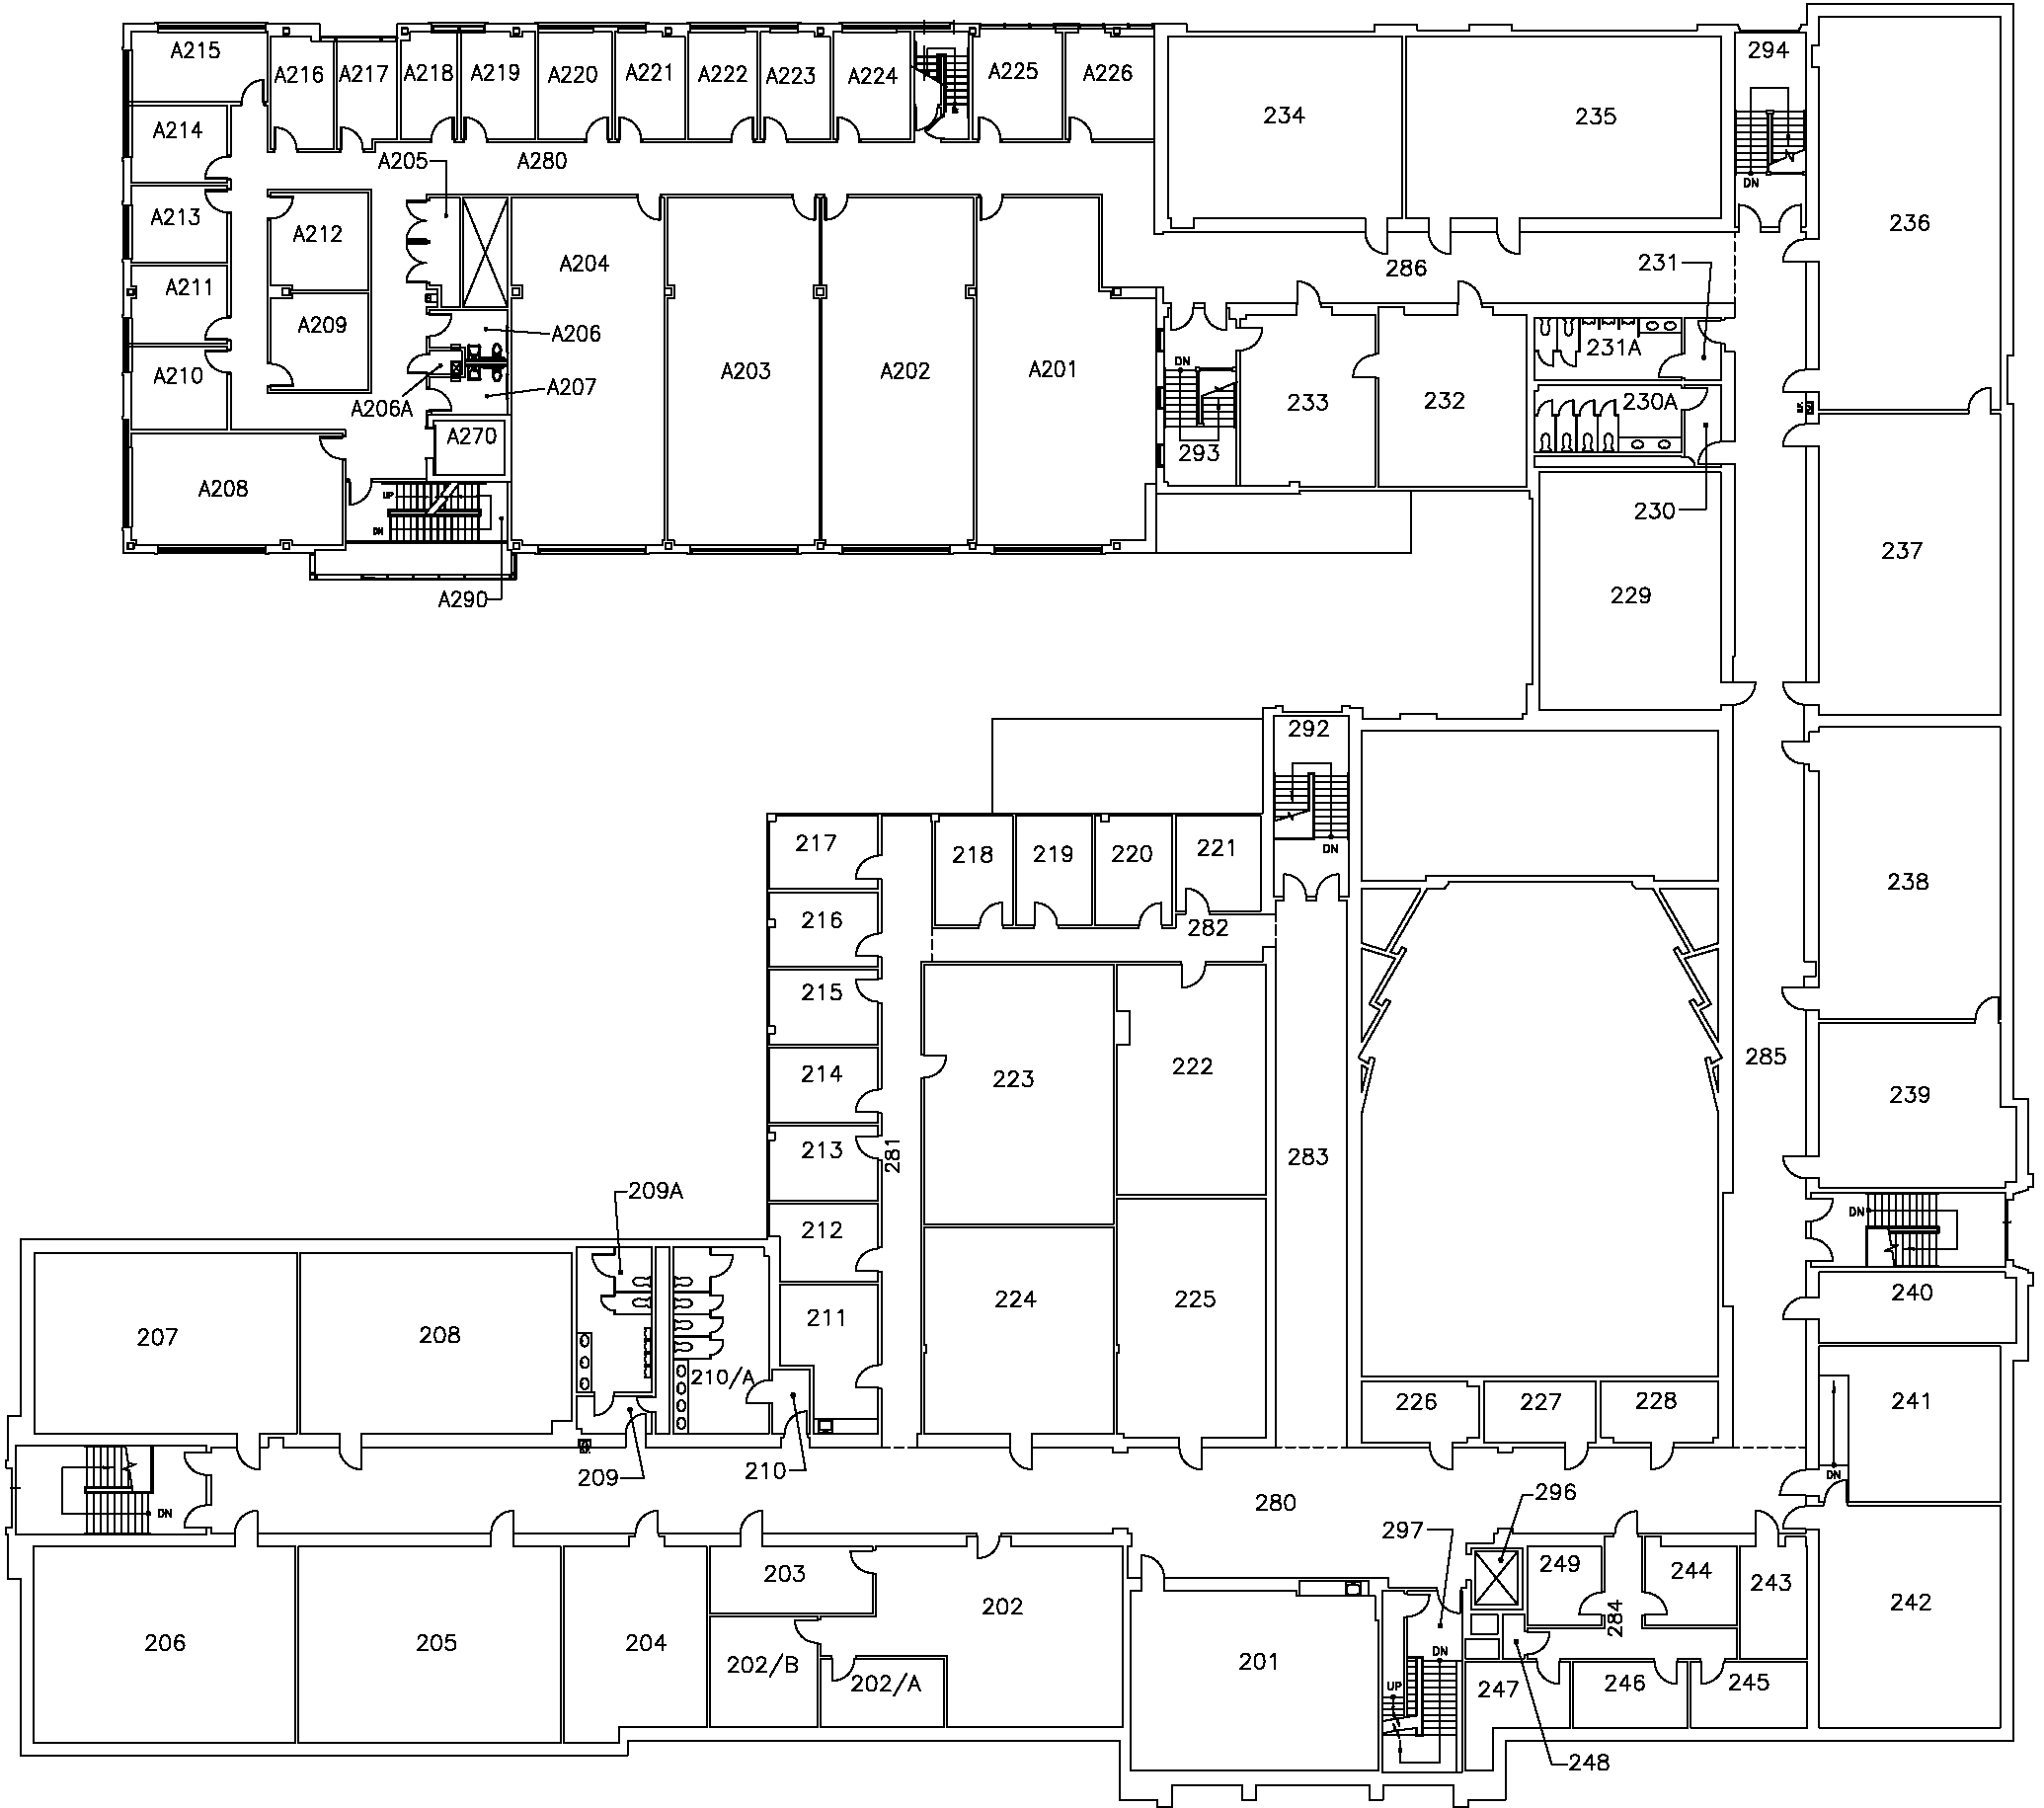 McMaster University Information Technology Building (ITB) - Second Floor Map